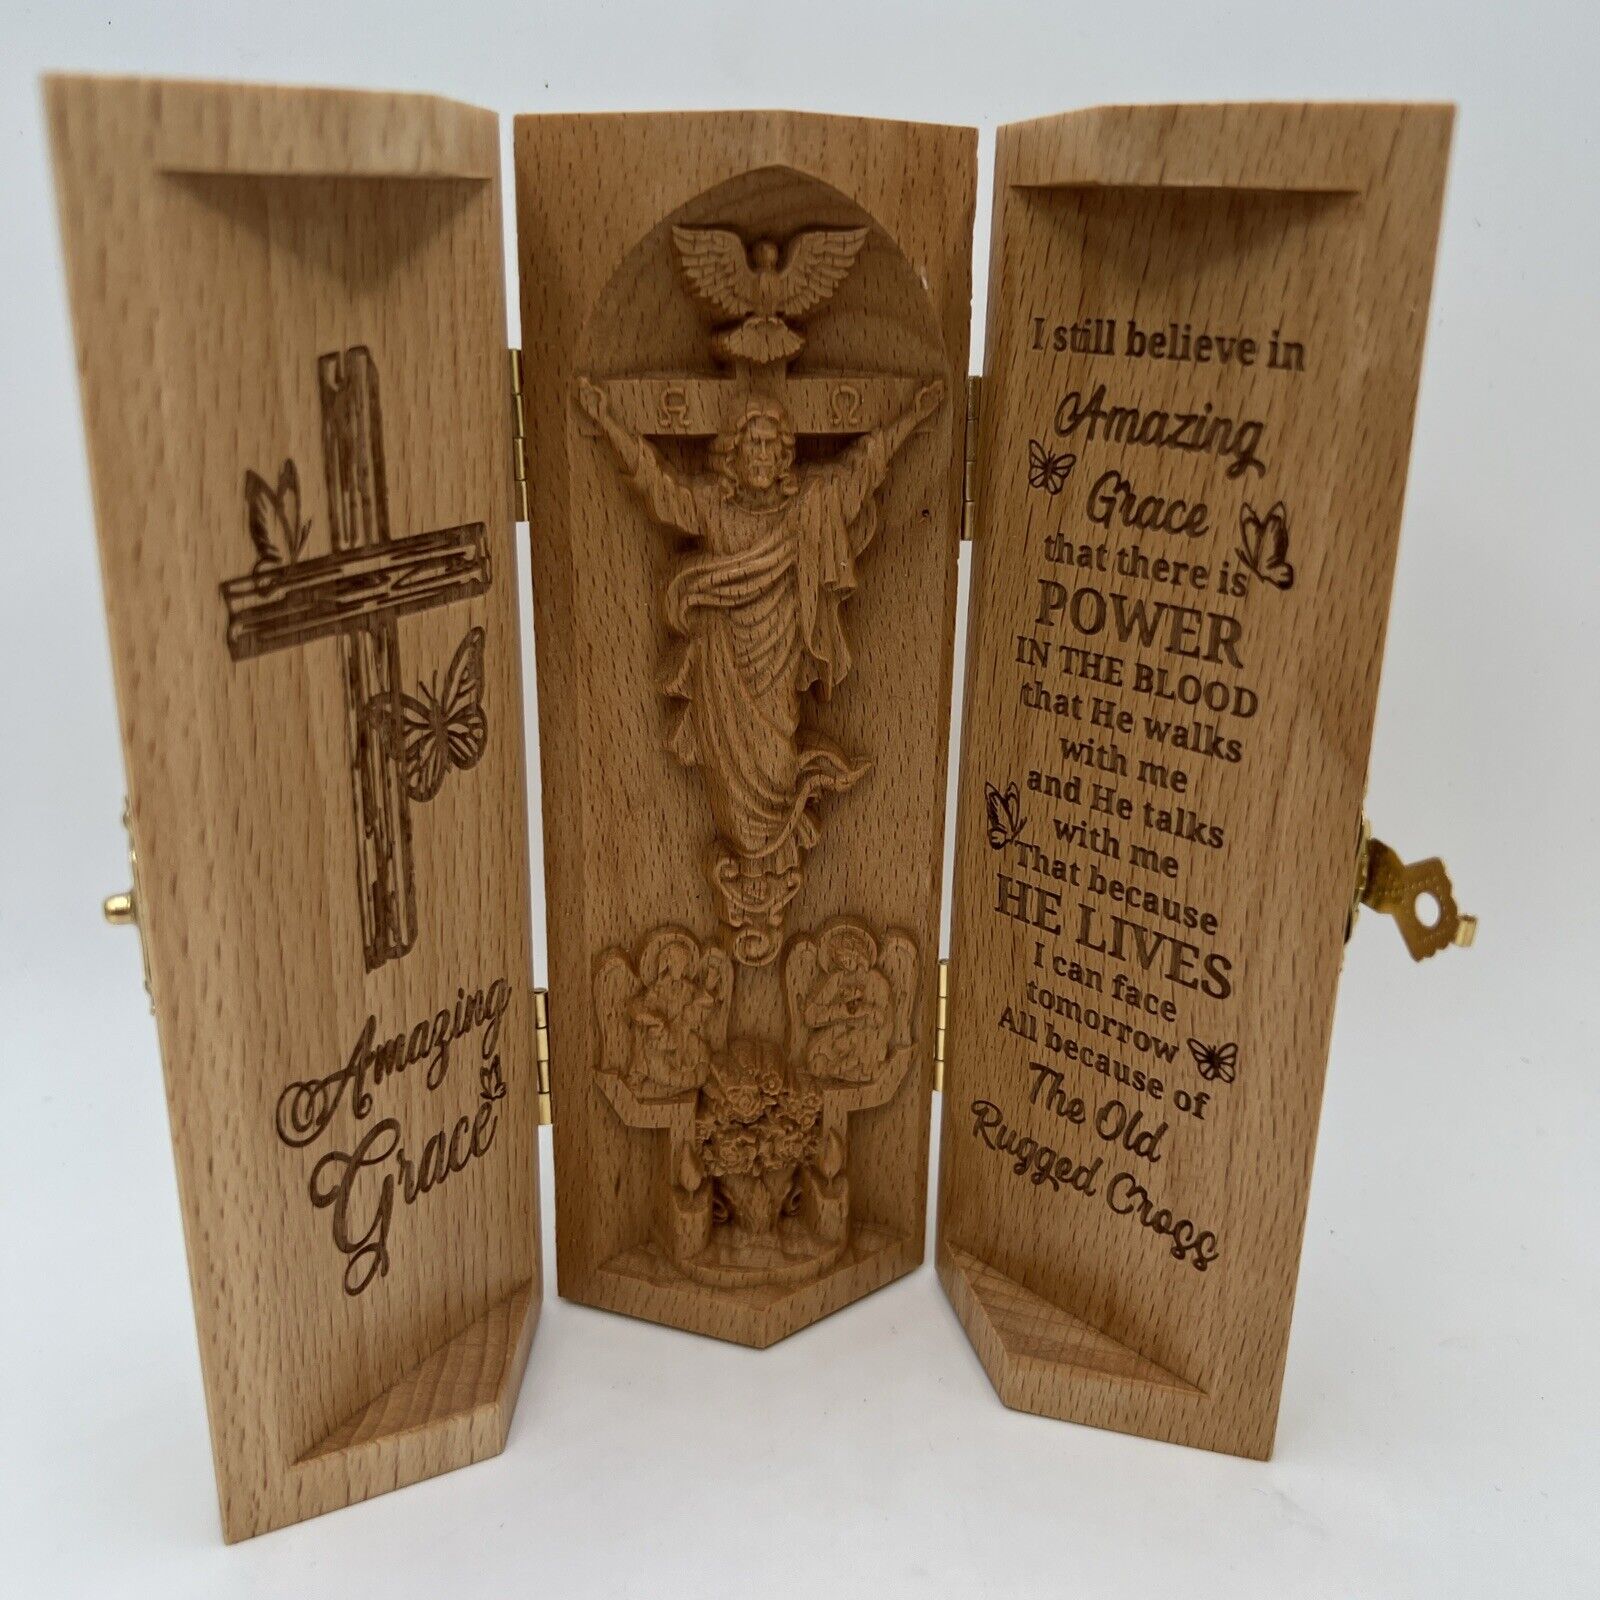 Amazing Grace Openable Wood Cylinder Sculpture Carving Of Jesus Christ